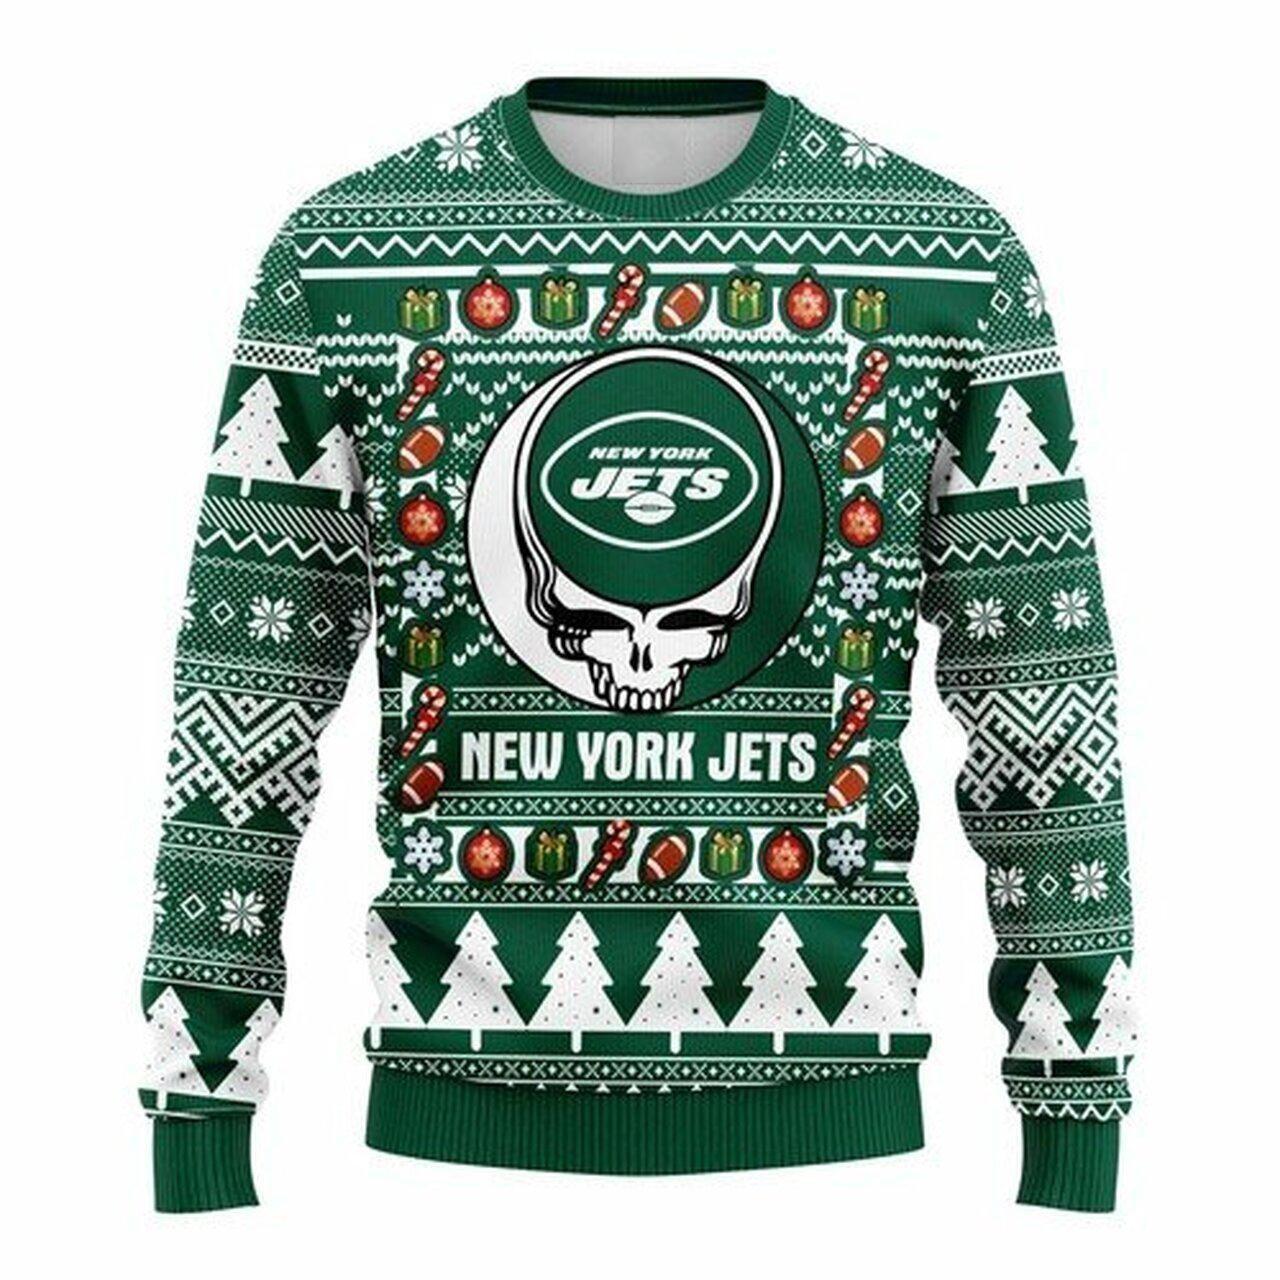 NFL New York Jets Grateful Dead ugly christmas sweater